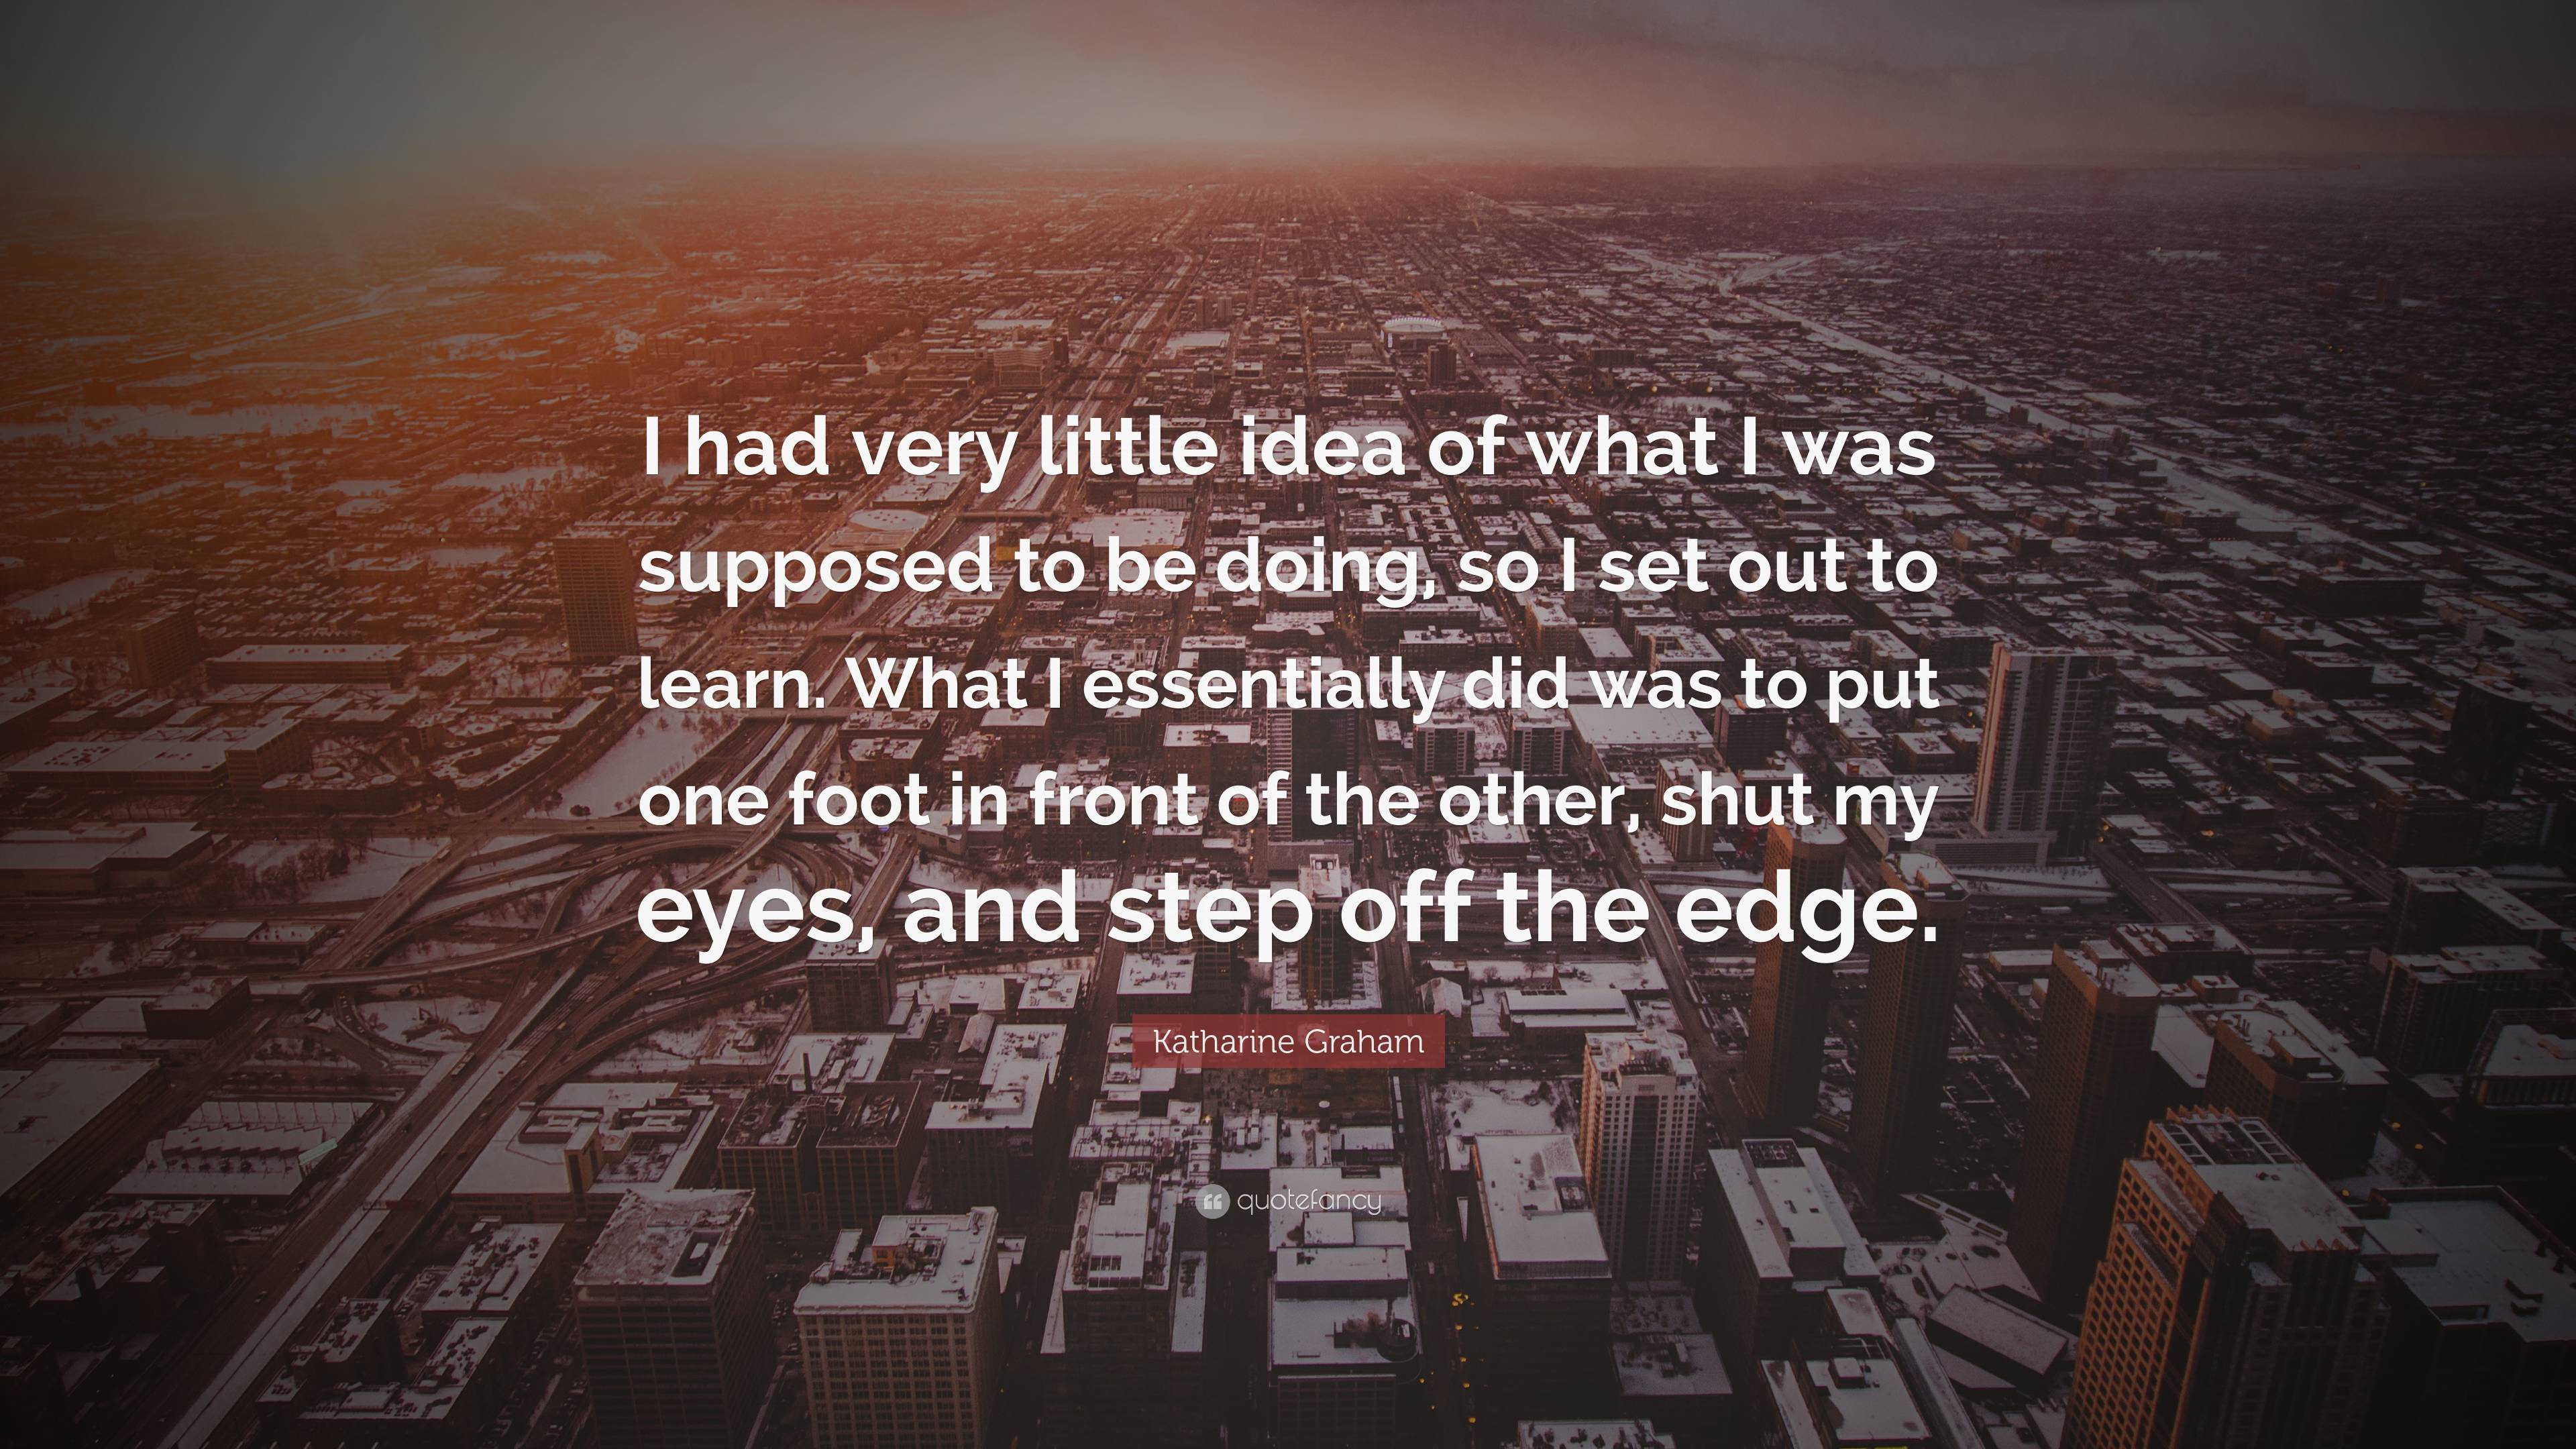 Katharine Graham Quote: “I had very little idea of what I was supposed to  be doing, so I set out to learn. What I essentially did was to put one ”